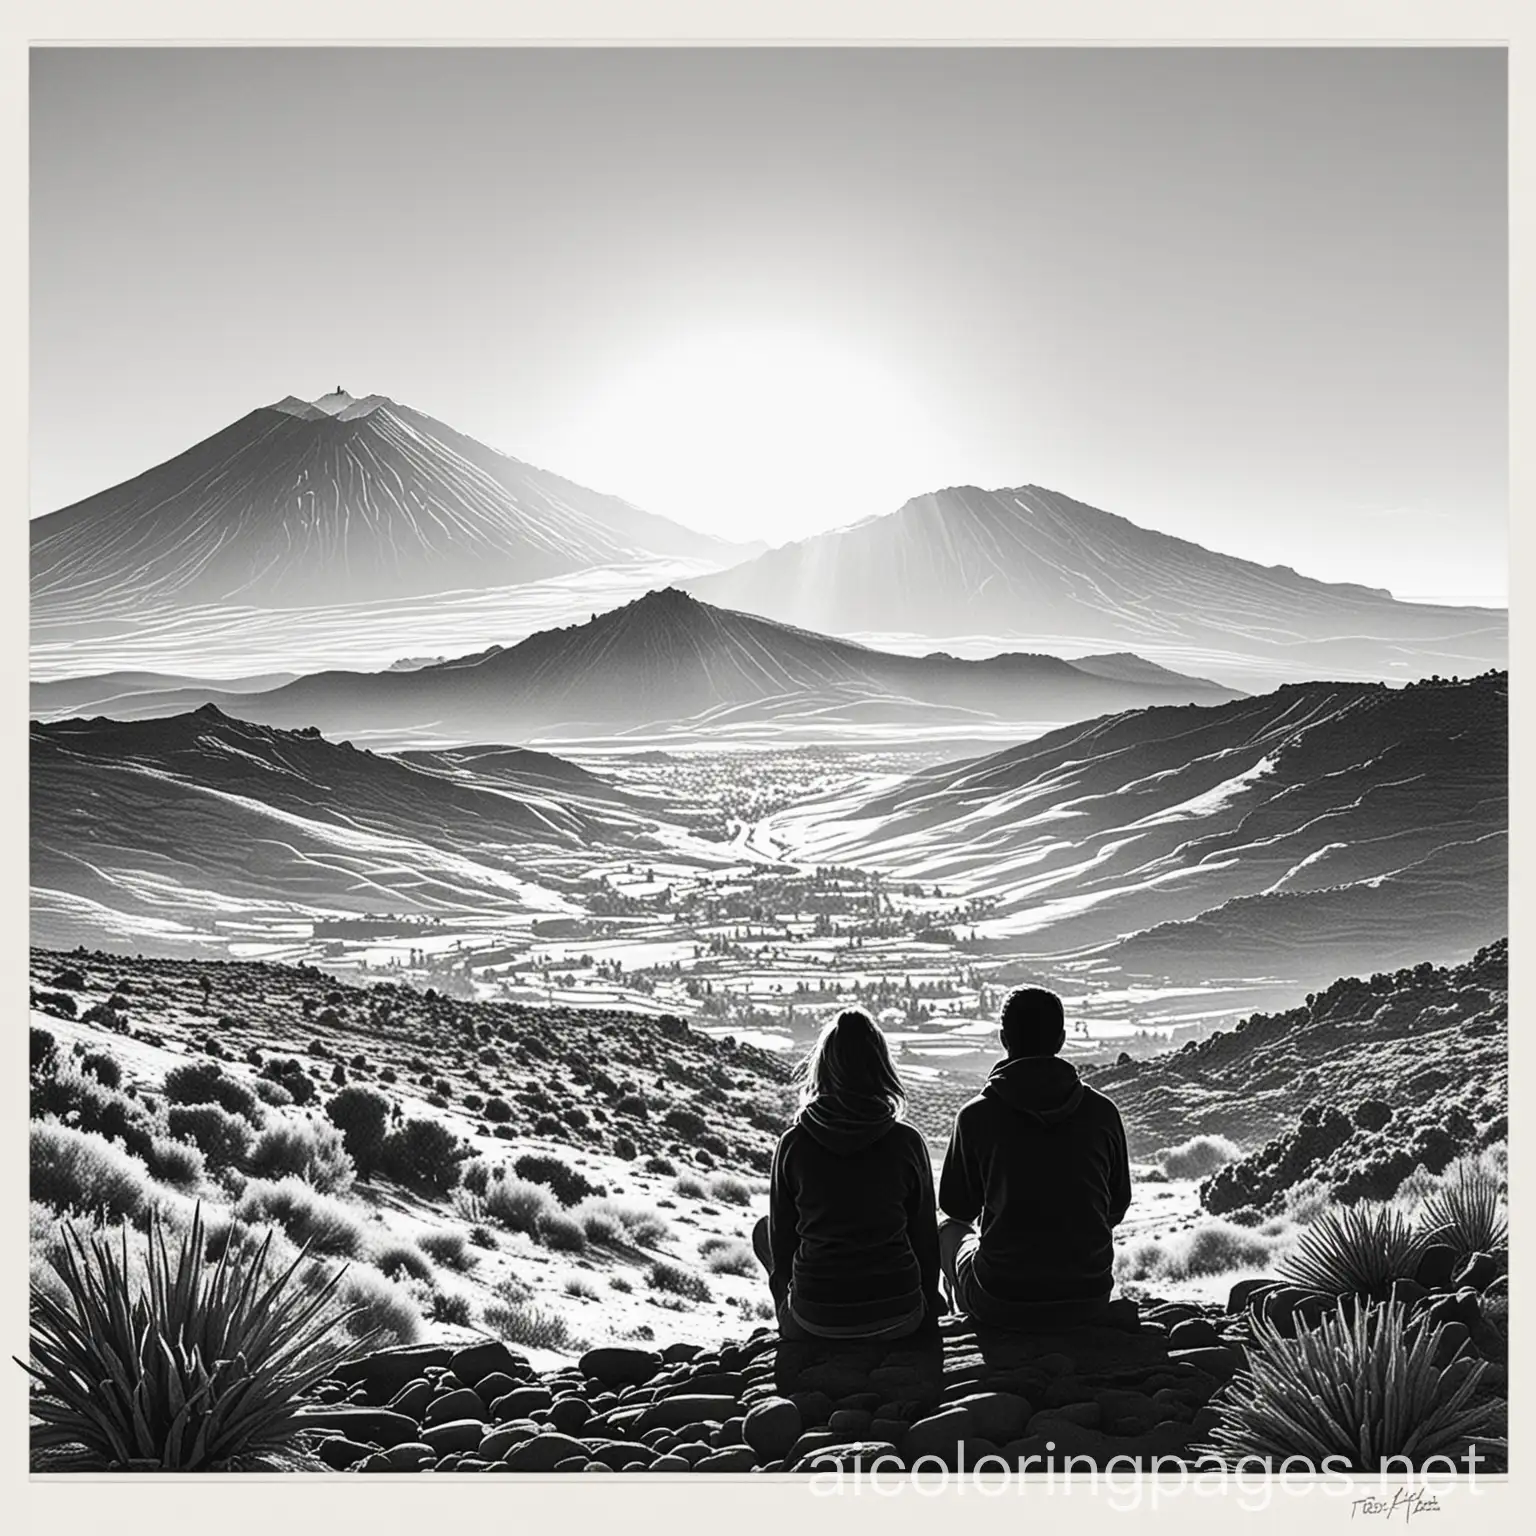 dos personas viendo atardecer en el teide
, Coloring Page, black and white, line art, white background, Simplicity, Ample White Space. The background of the coloring page is plain white to make it easy for young children to color within the lines. The outlines of all the subjects are easy to distinguish, making it simple for kids to color without too much difficulty